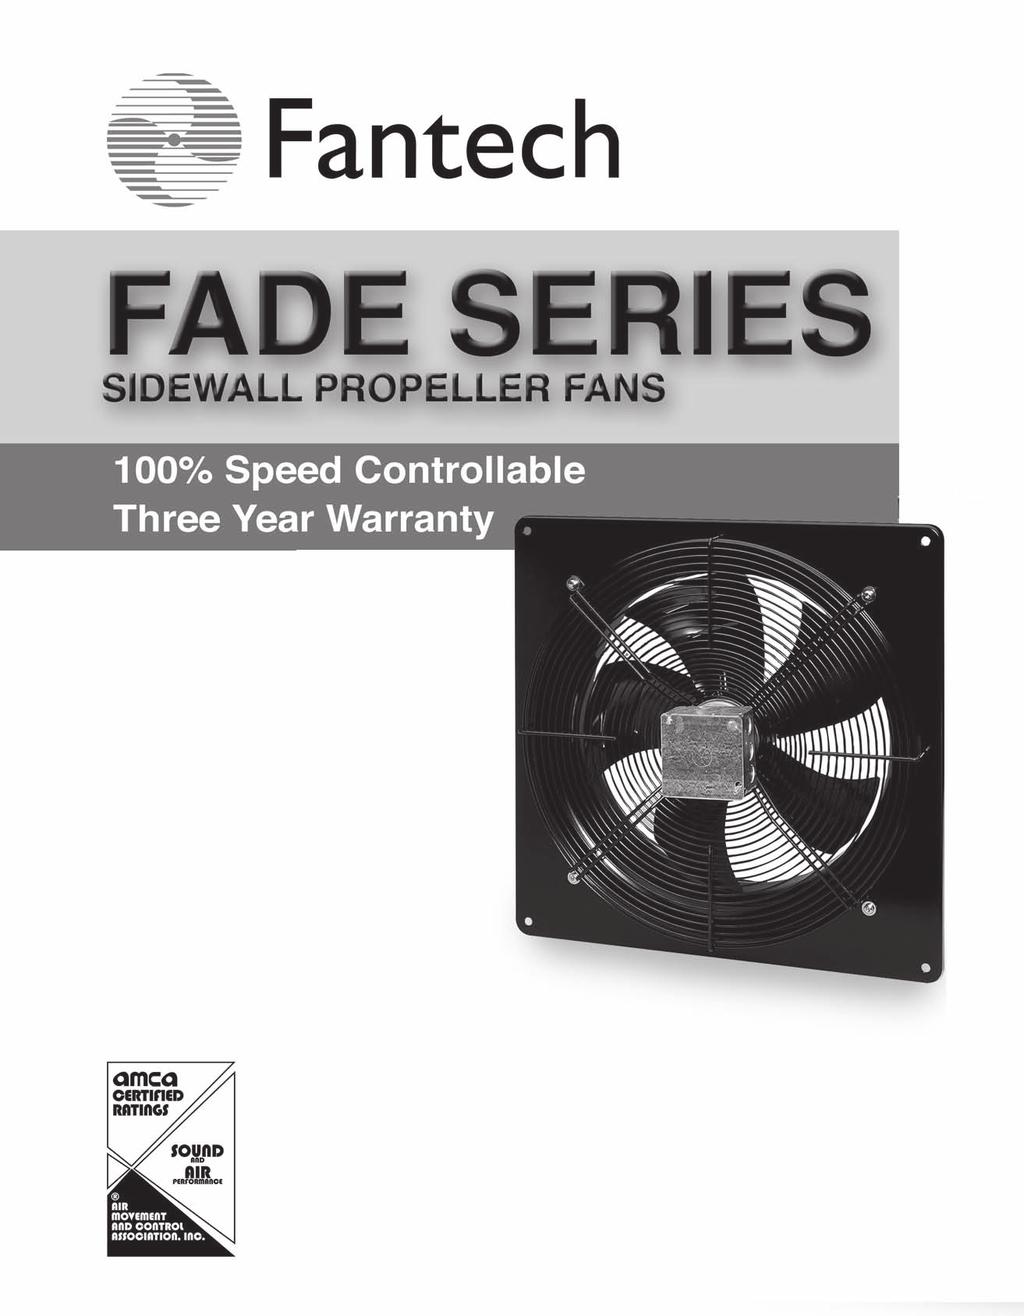 January 2008 FADE0108 Fantech, Inc. certifies that the FADE Series shown herein is licensed to bear the AMCA Seal.